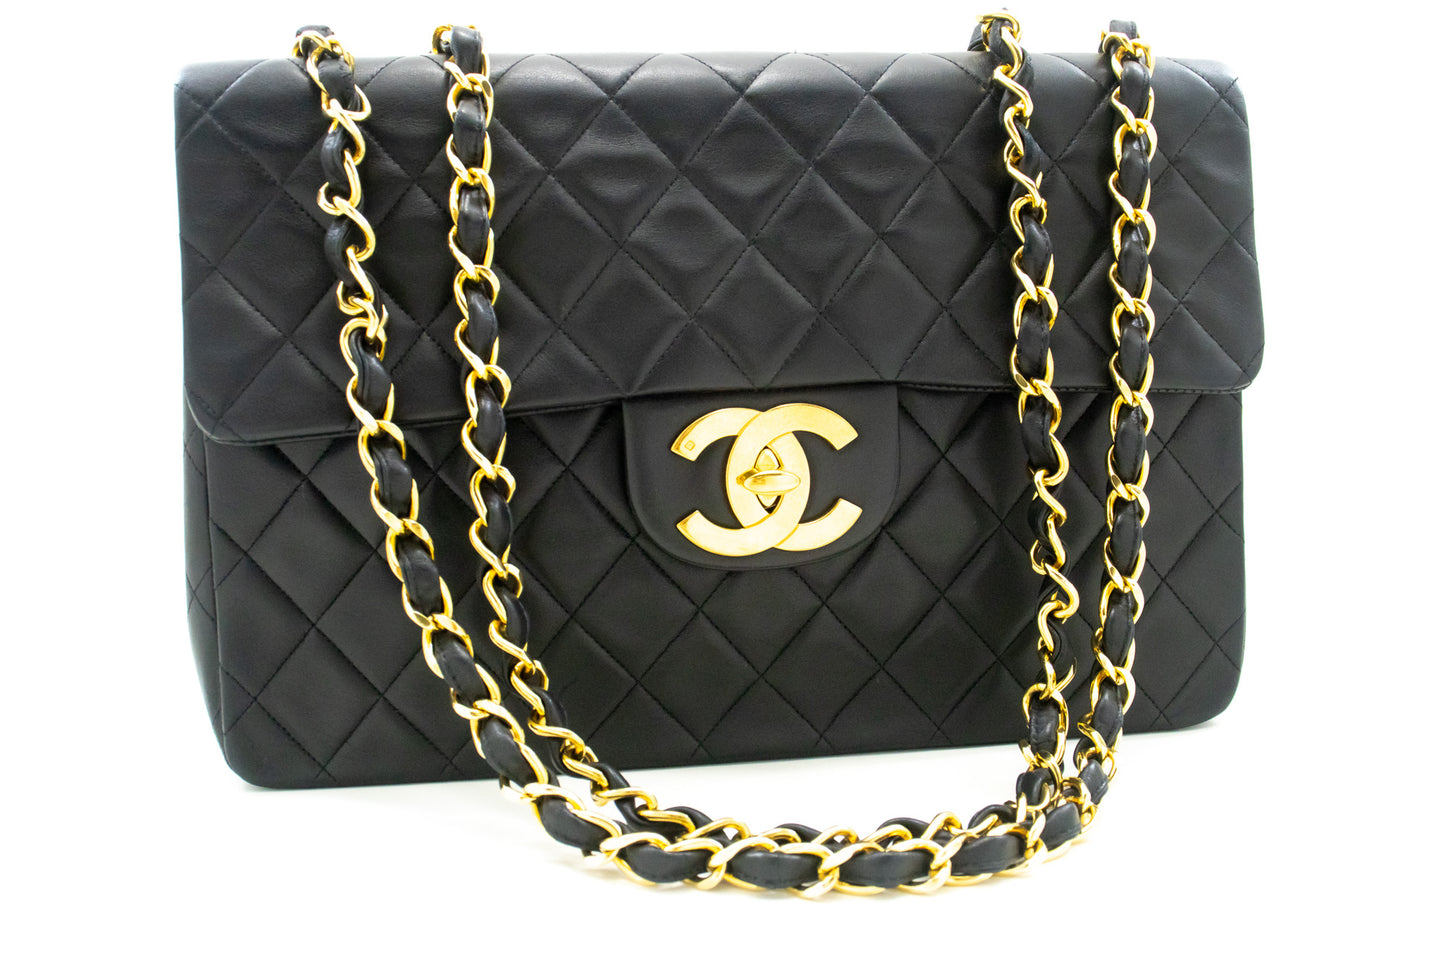 Chanel Women's Luxurious Leather Flap Shoulder Bag in Black